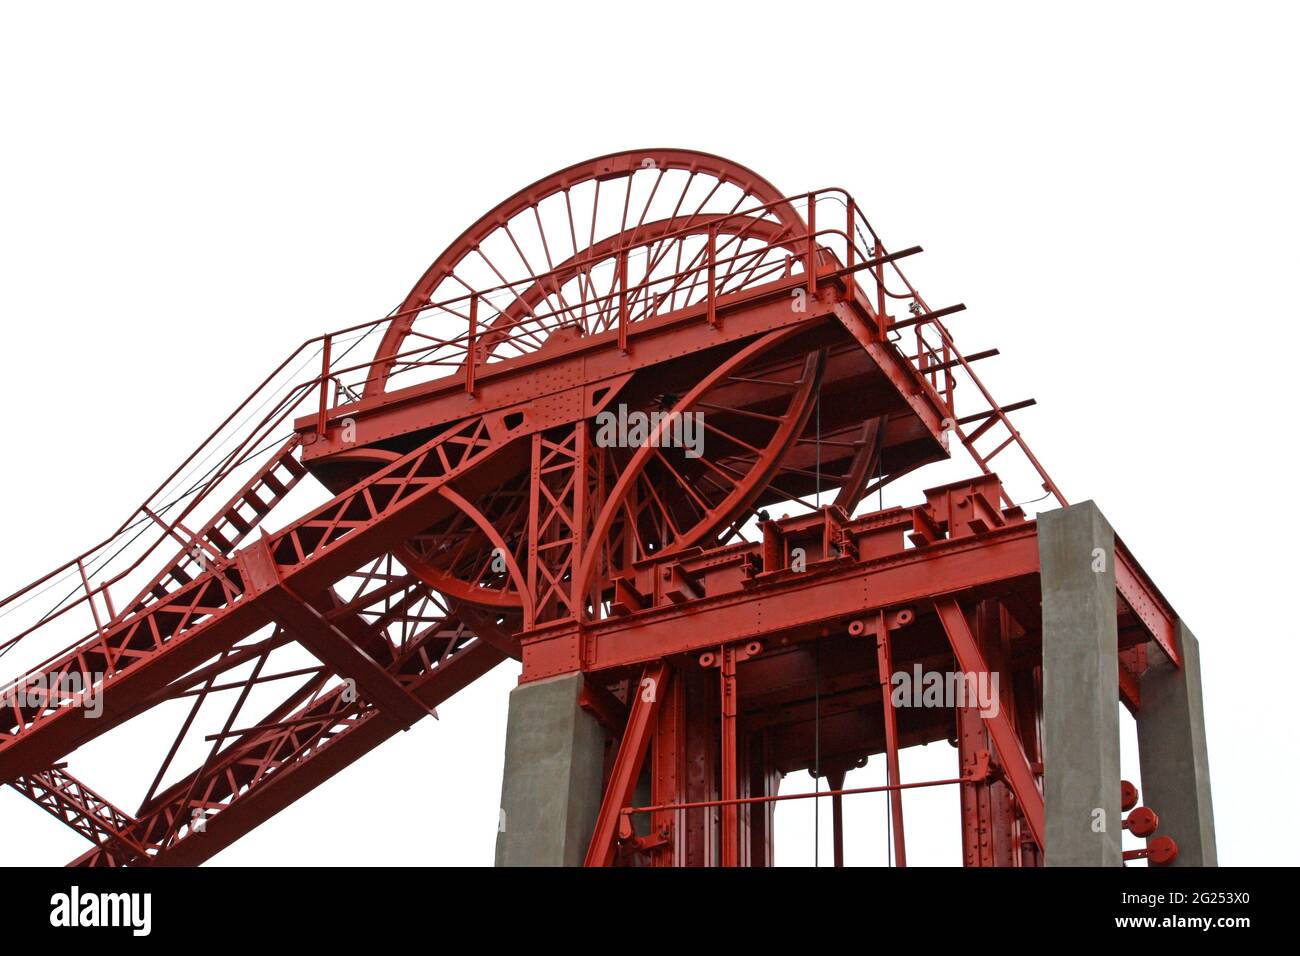 The Top of a Refurbished Colliery Headstocks. Stock Photo